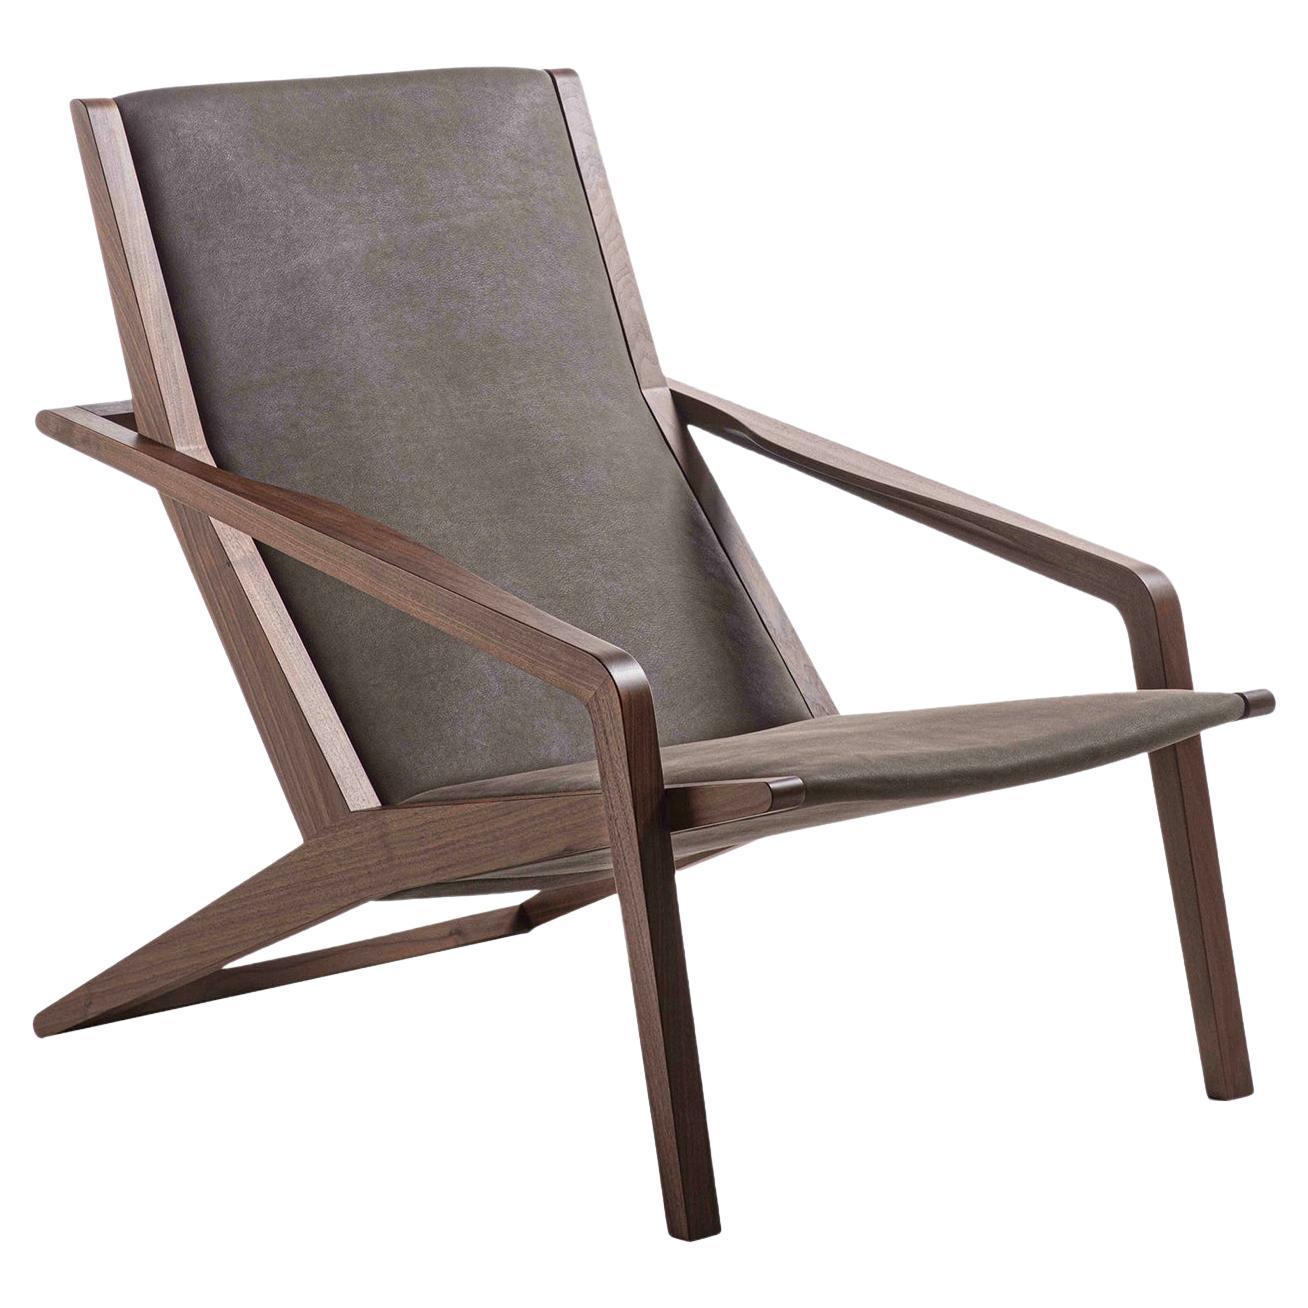 Gazzella Lounge Chair For Sale